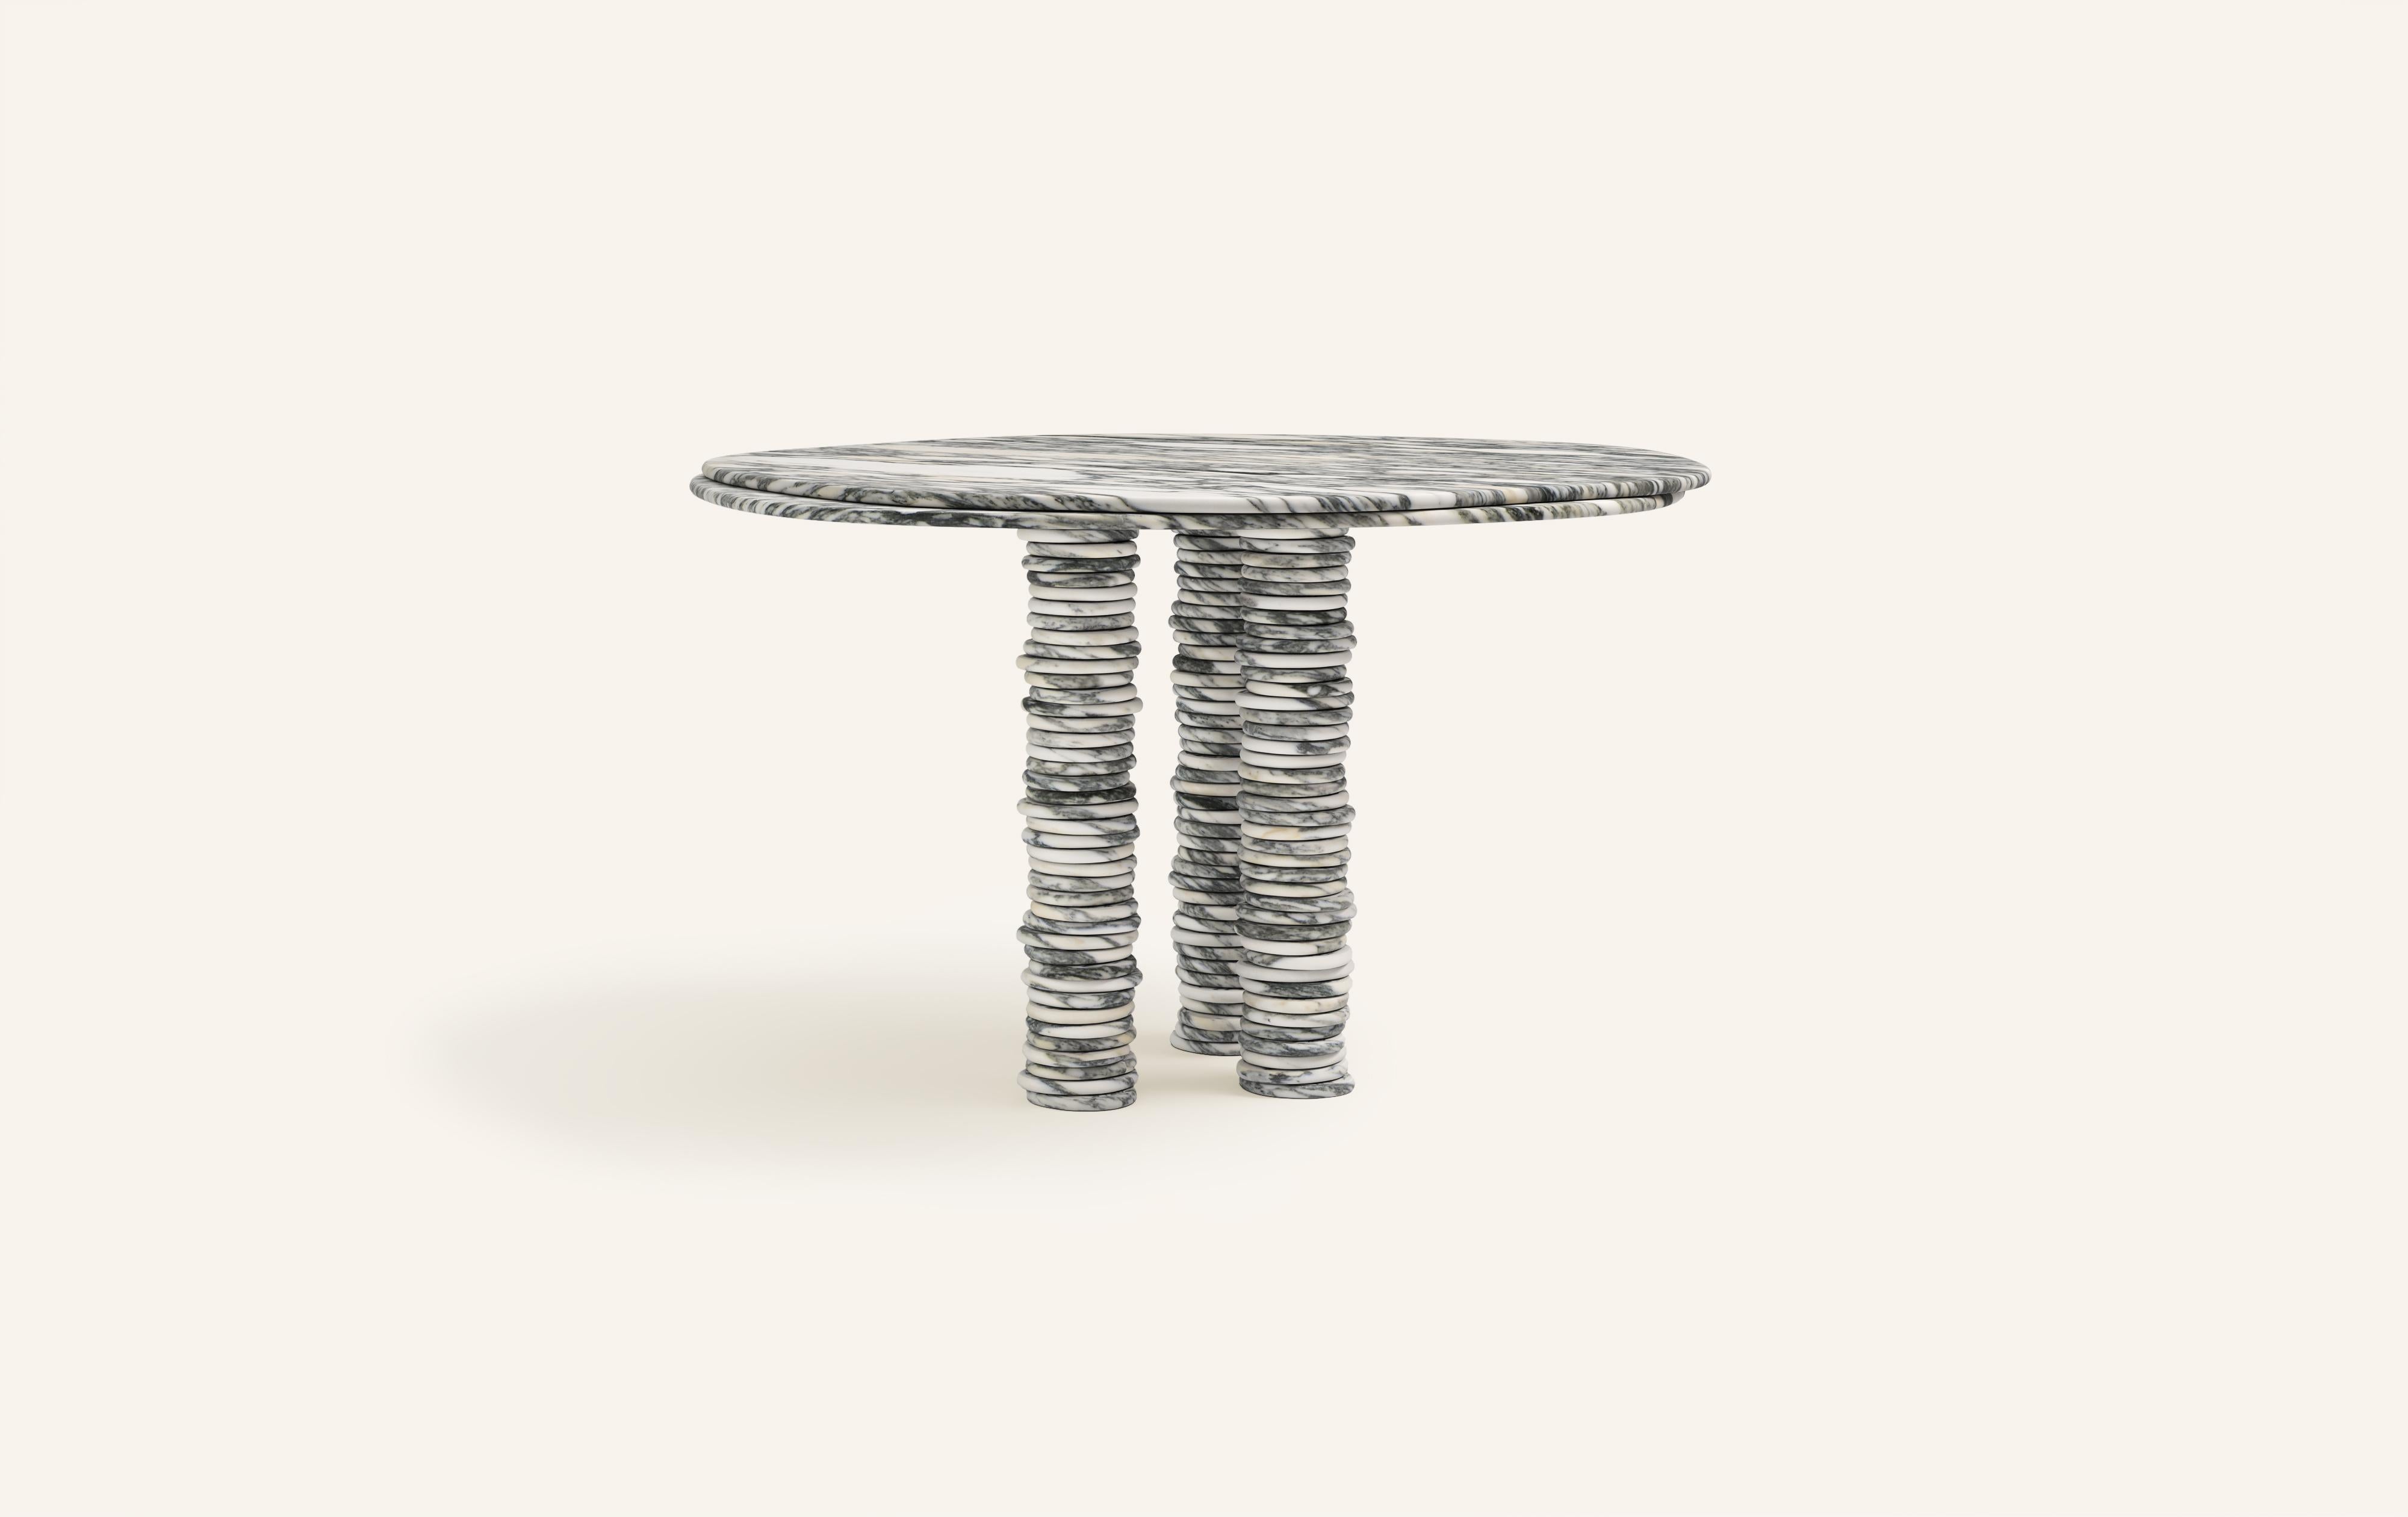 'ONDA', ITALIAN FOR 'WAVE', HAS INSPIRED A FREEFORM ORGANIC BODY, HEROING A COMPLEX AND TEXTURED COLLECTION. COMPRISING SIDE TABLES FOR LAYERING, COFFEE TABLES AND DINING TABLES.

DIMENSIONS:
60”L x 60”W x 29-3/4”H: 
- 1.5